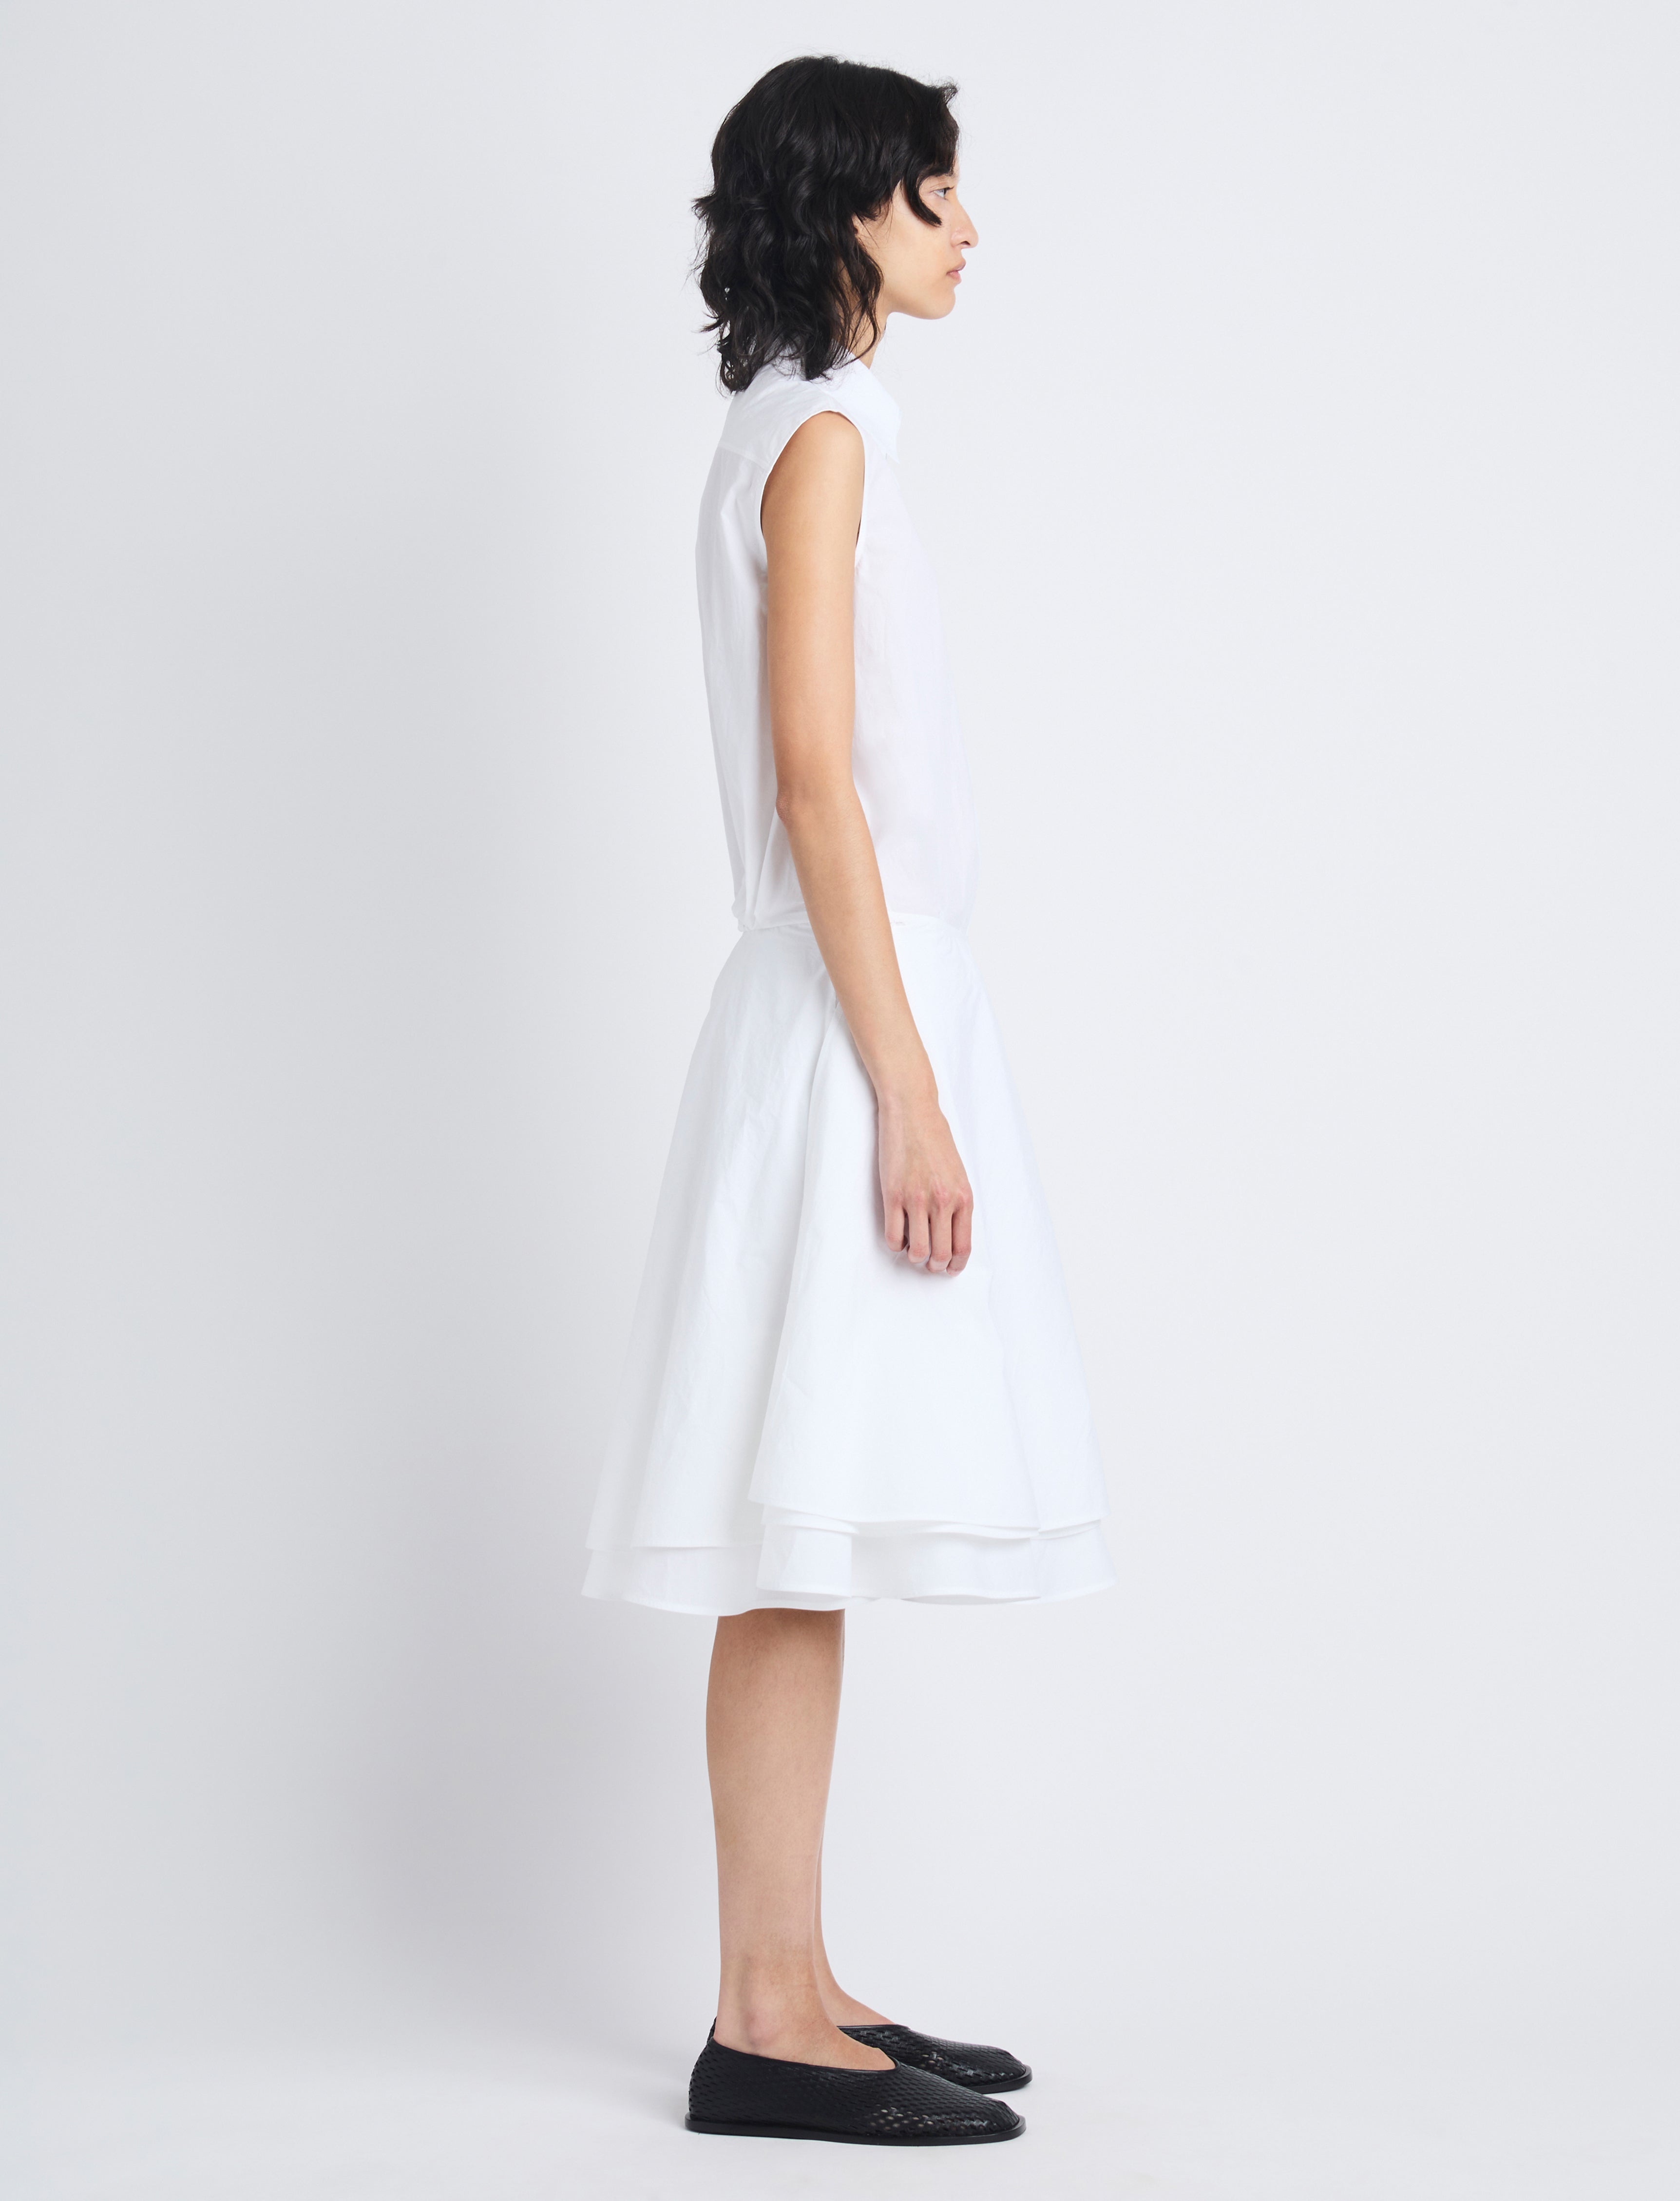 Cindy Dress in Washed Cotton Poplin - 3